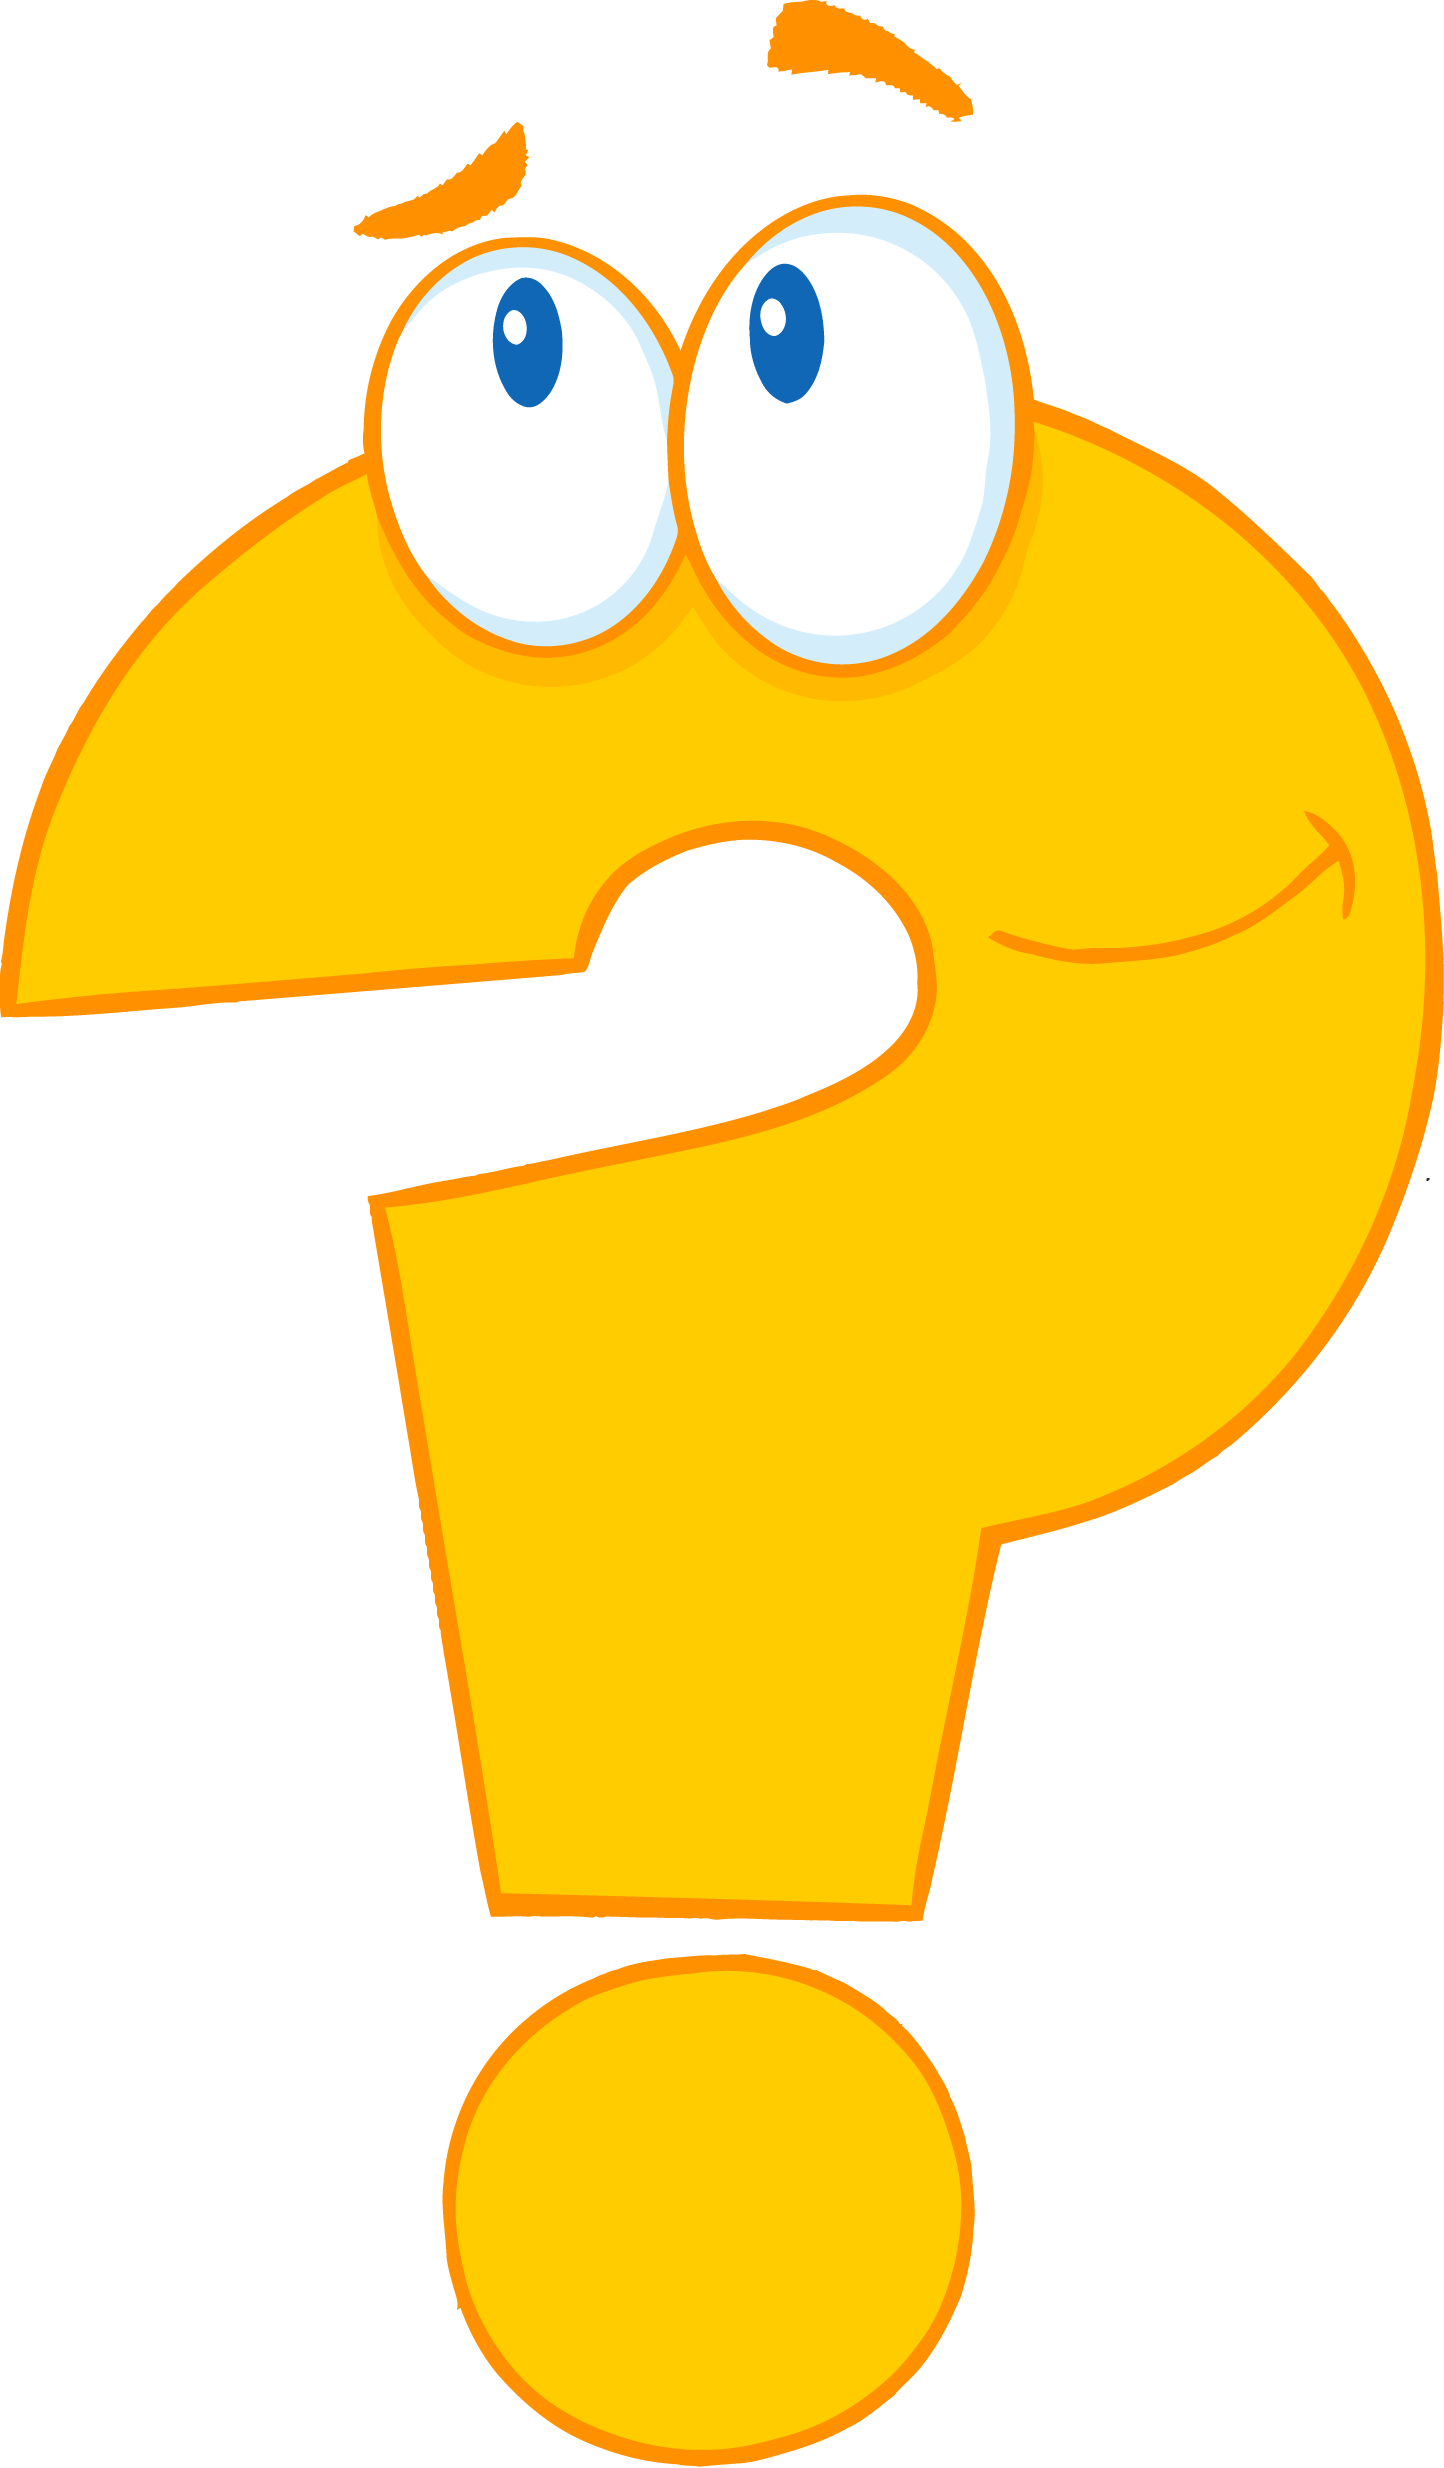 gif_5033-Clipart-Illustration-of-Question-Mark-Cartoon-Character ...